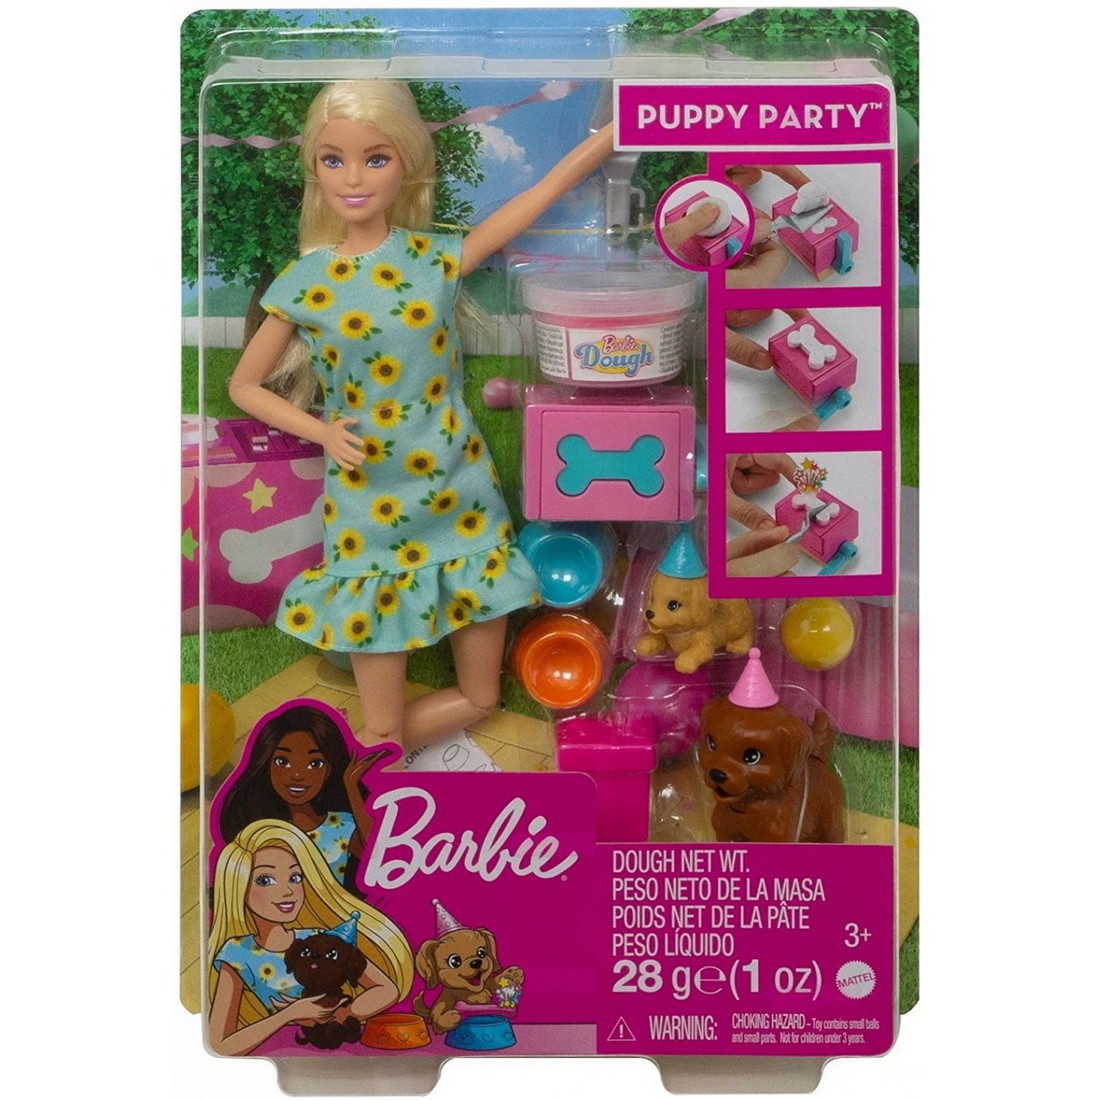 Barbie Puppy Party Doll & Playset -GXV74